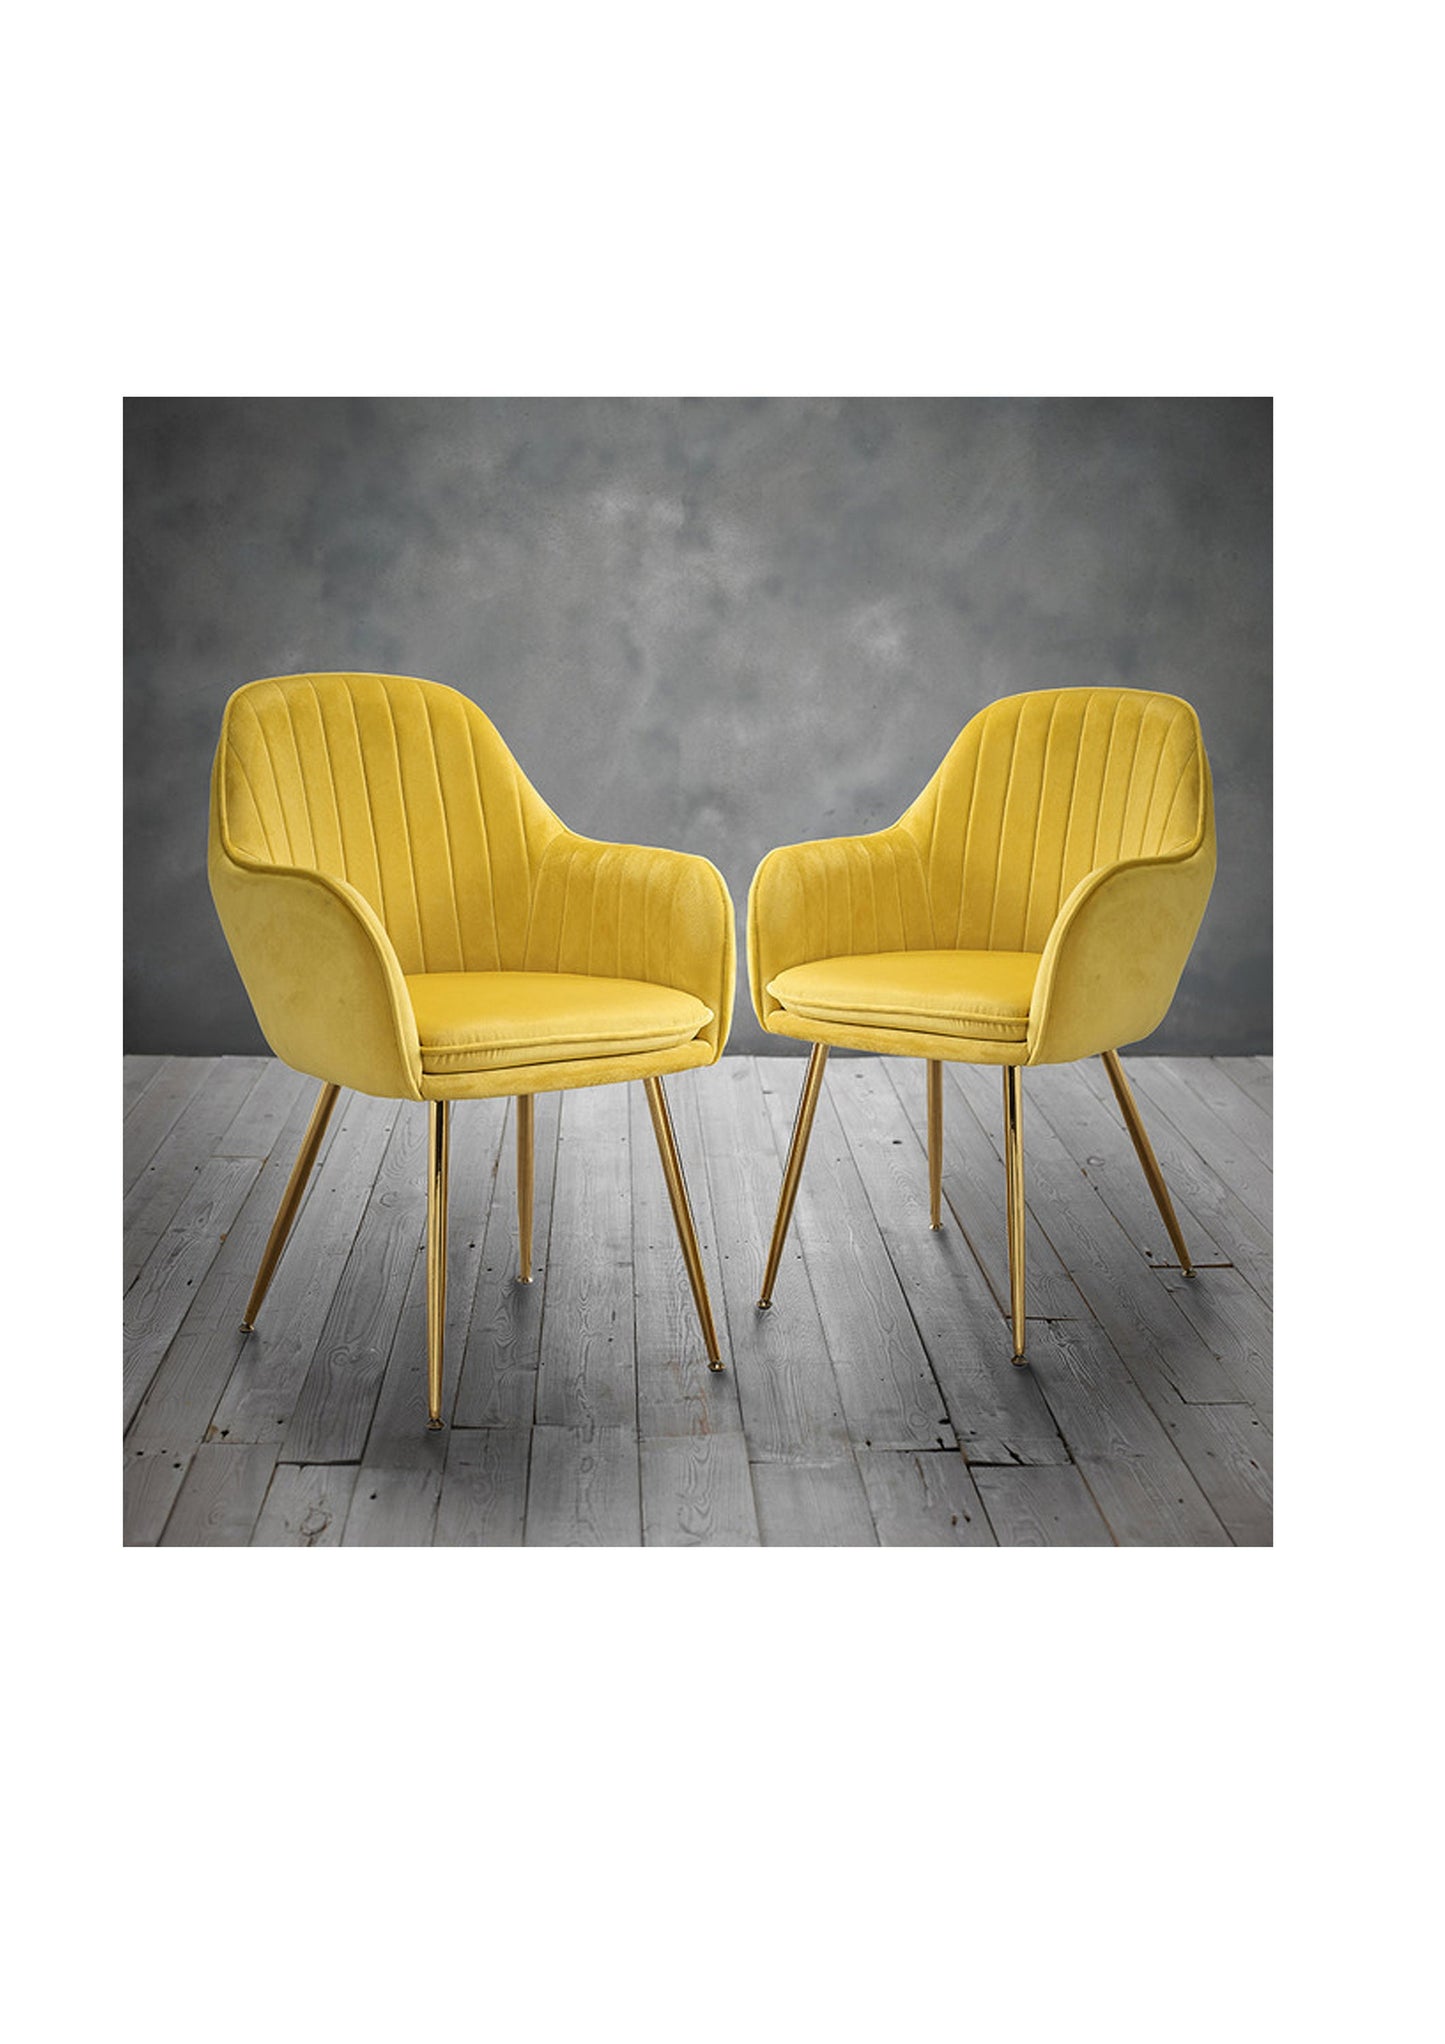 NEW Luxury Stylish Dining Office Desk Velvet Chair with gold legs  - Pack of 2 -  Yellow / Green/ Blue